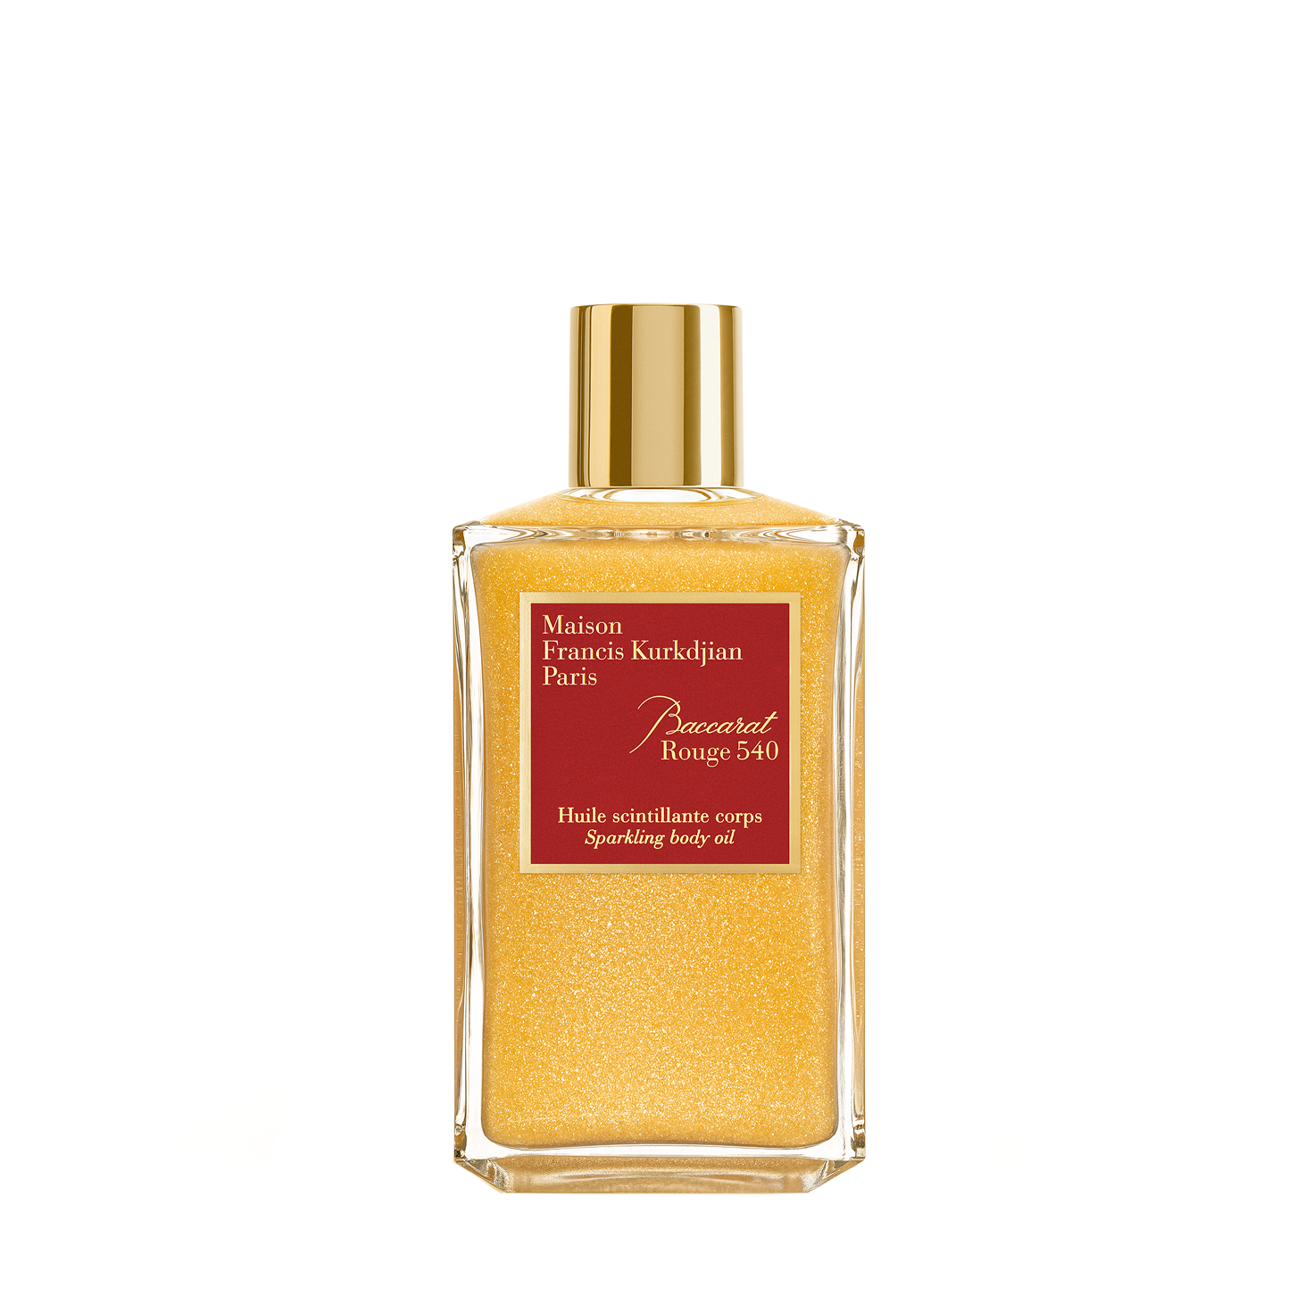 Baccarat Rouge 540 Sparkling Body Oil + Chanel N°5 The Gold Body